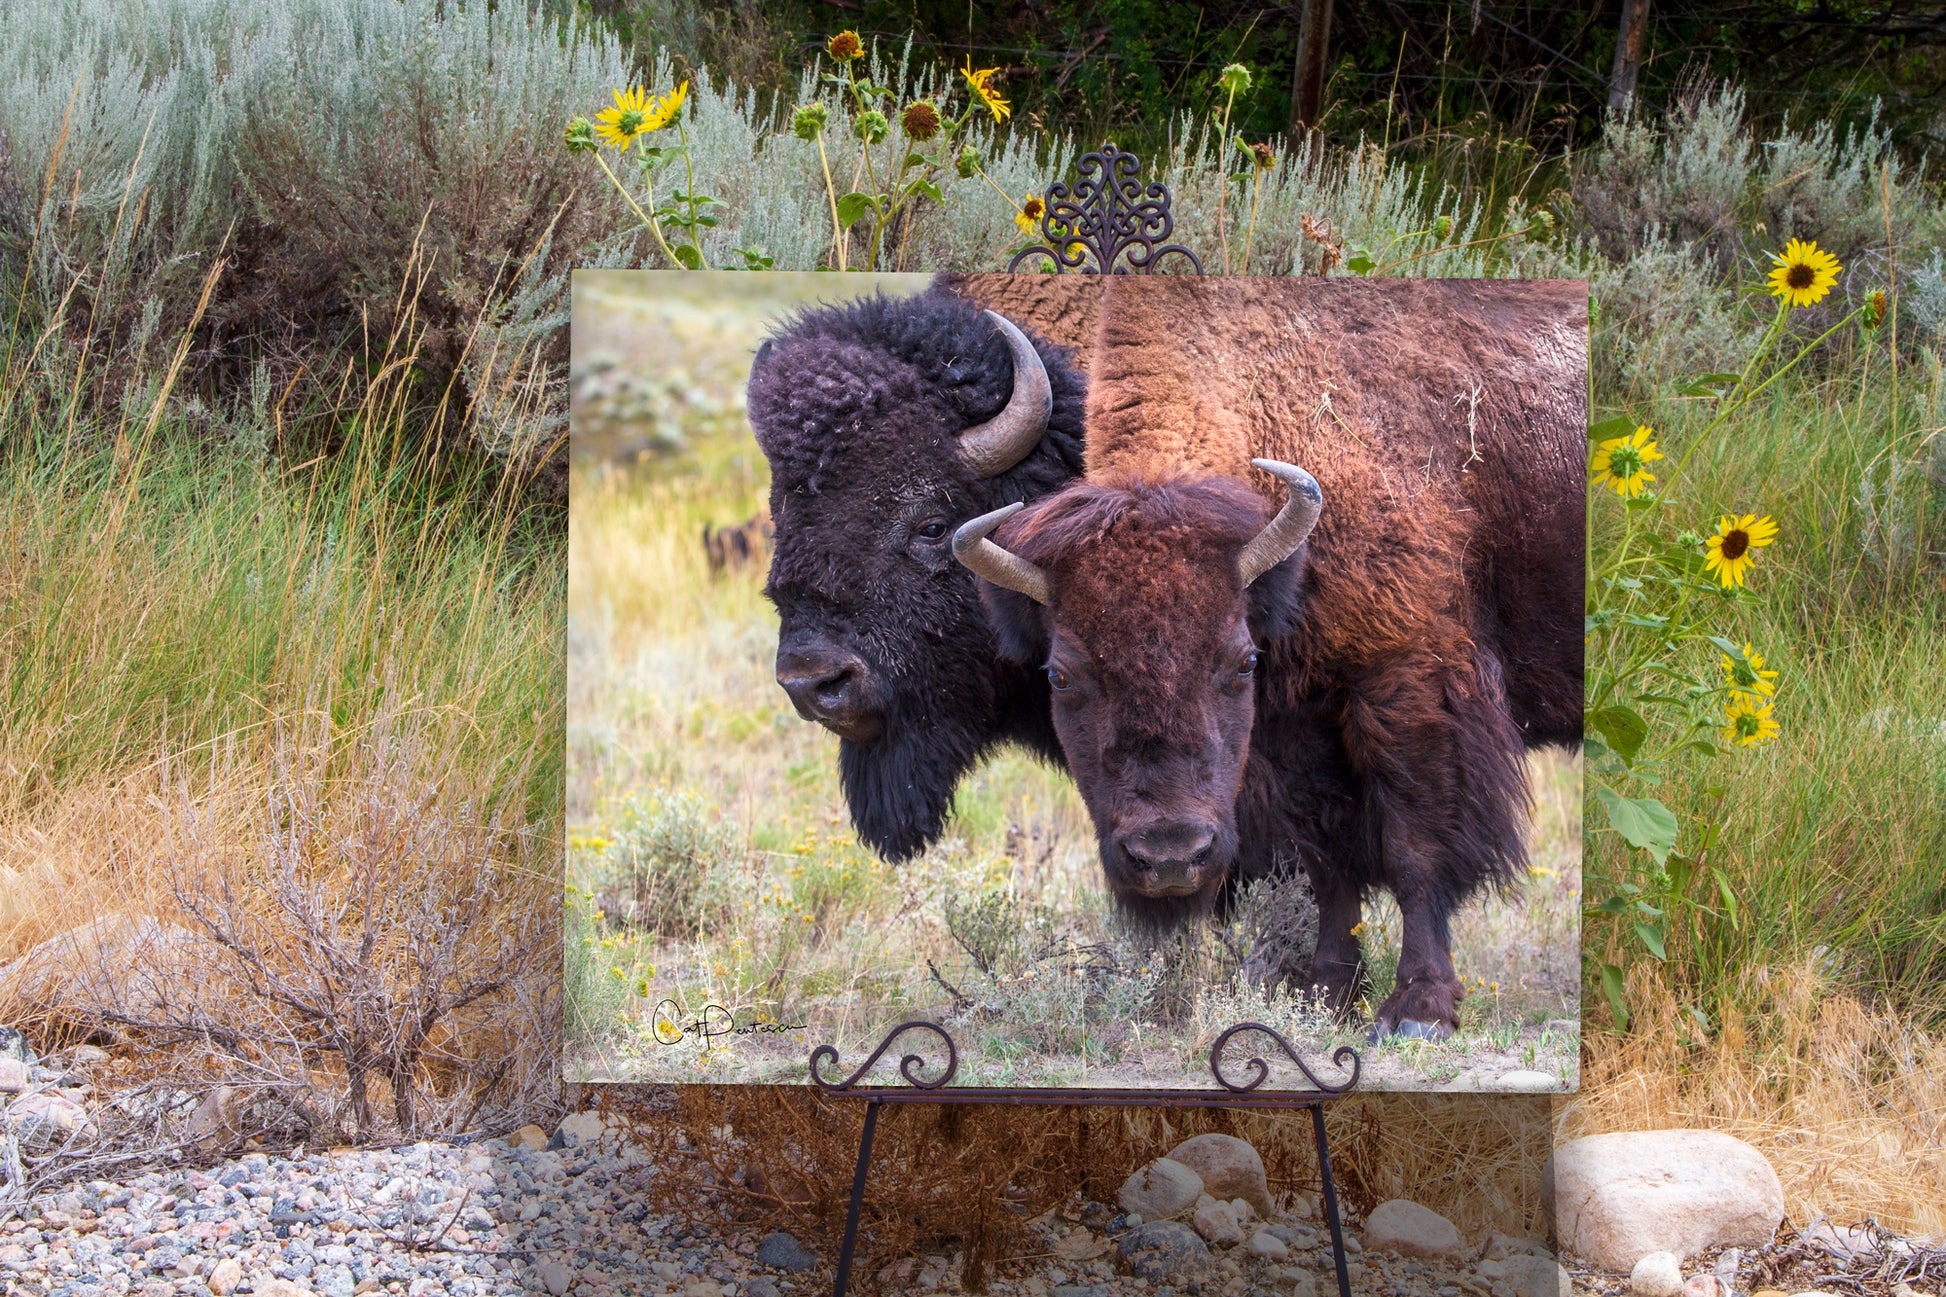 Happy Couple on iron easel. Close up portrait of bull and cow buffalo standing next to each other in the wild. Late summer in field of green grass, sagebrush golden flowers